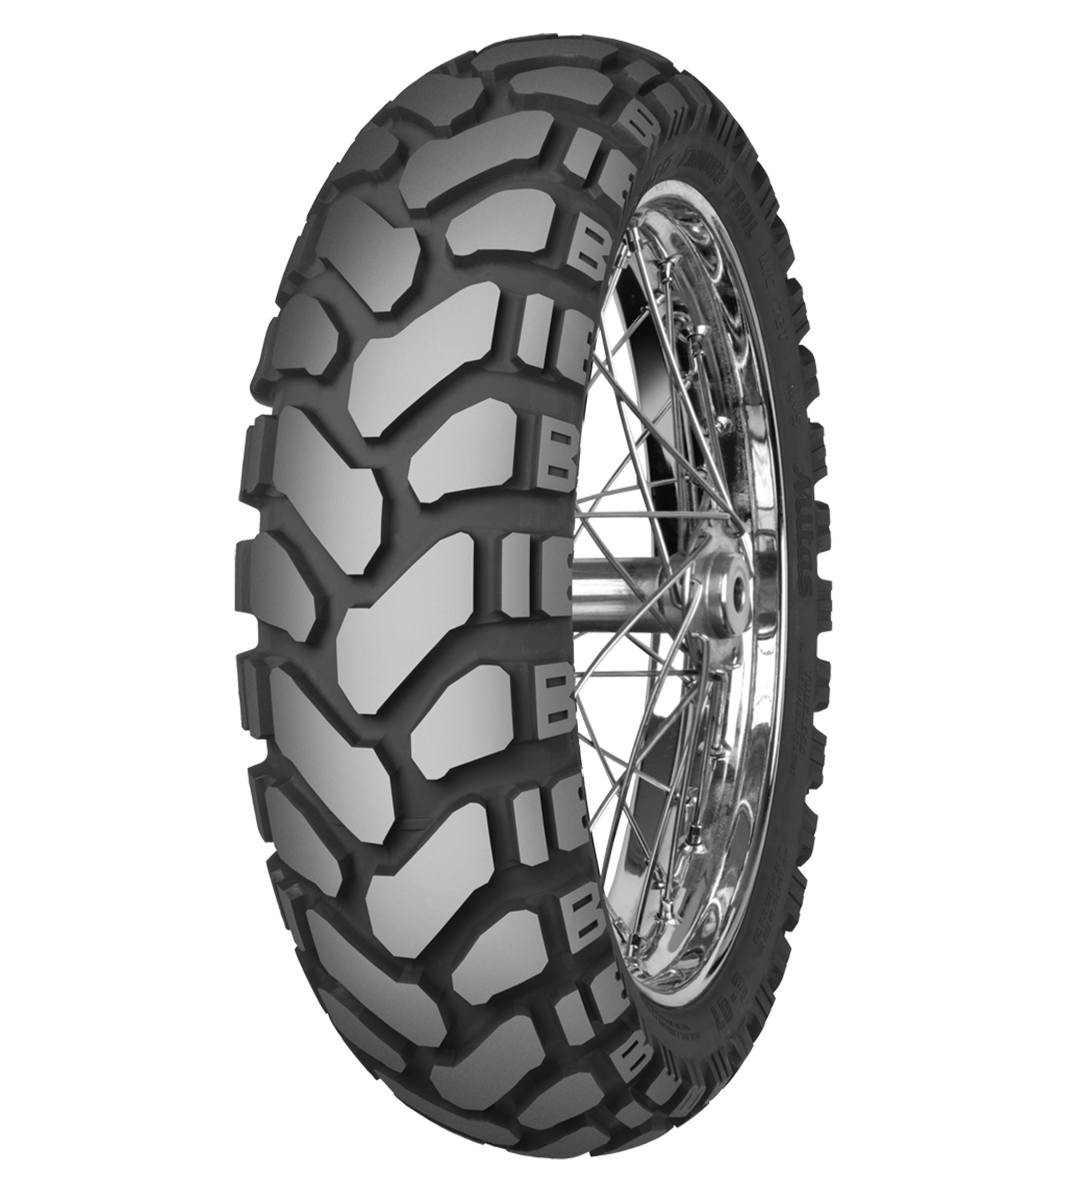 Mitas E-07+ ENDURO TRAIL 150/70B17 Trail ON Trail 69T No Stripe Tubeless Rear Tire, 224059, 150/70B17, Adventure Touring, E Series, E-07+ Enduro Trail, Rear, Trail, Trail ON, Tires - Imported and distributed in North & South America by Lindeco Genuine Powersports - Premier Powersports Equipment and Accessories for Motorcycle Enthusiasts, Professional Riders and Dealers.